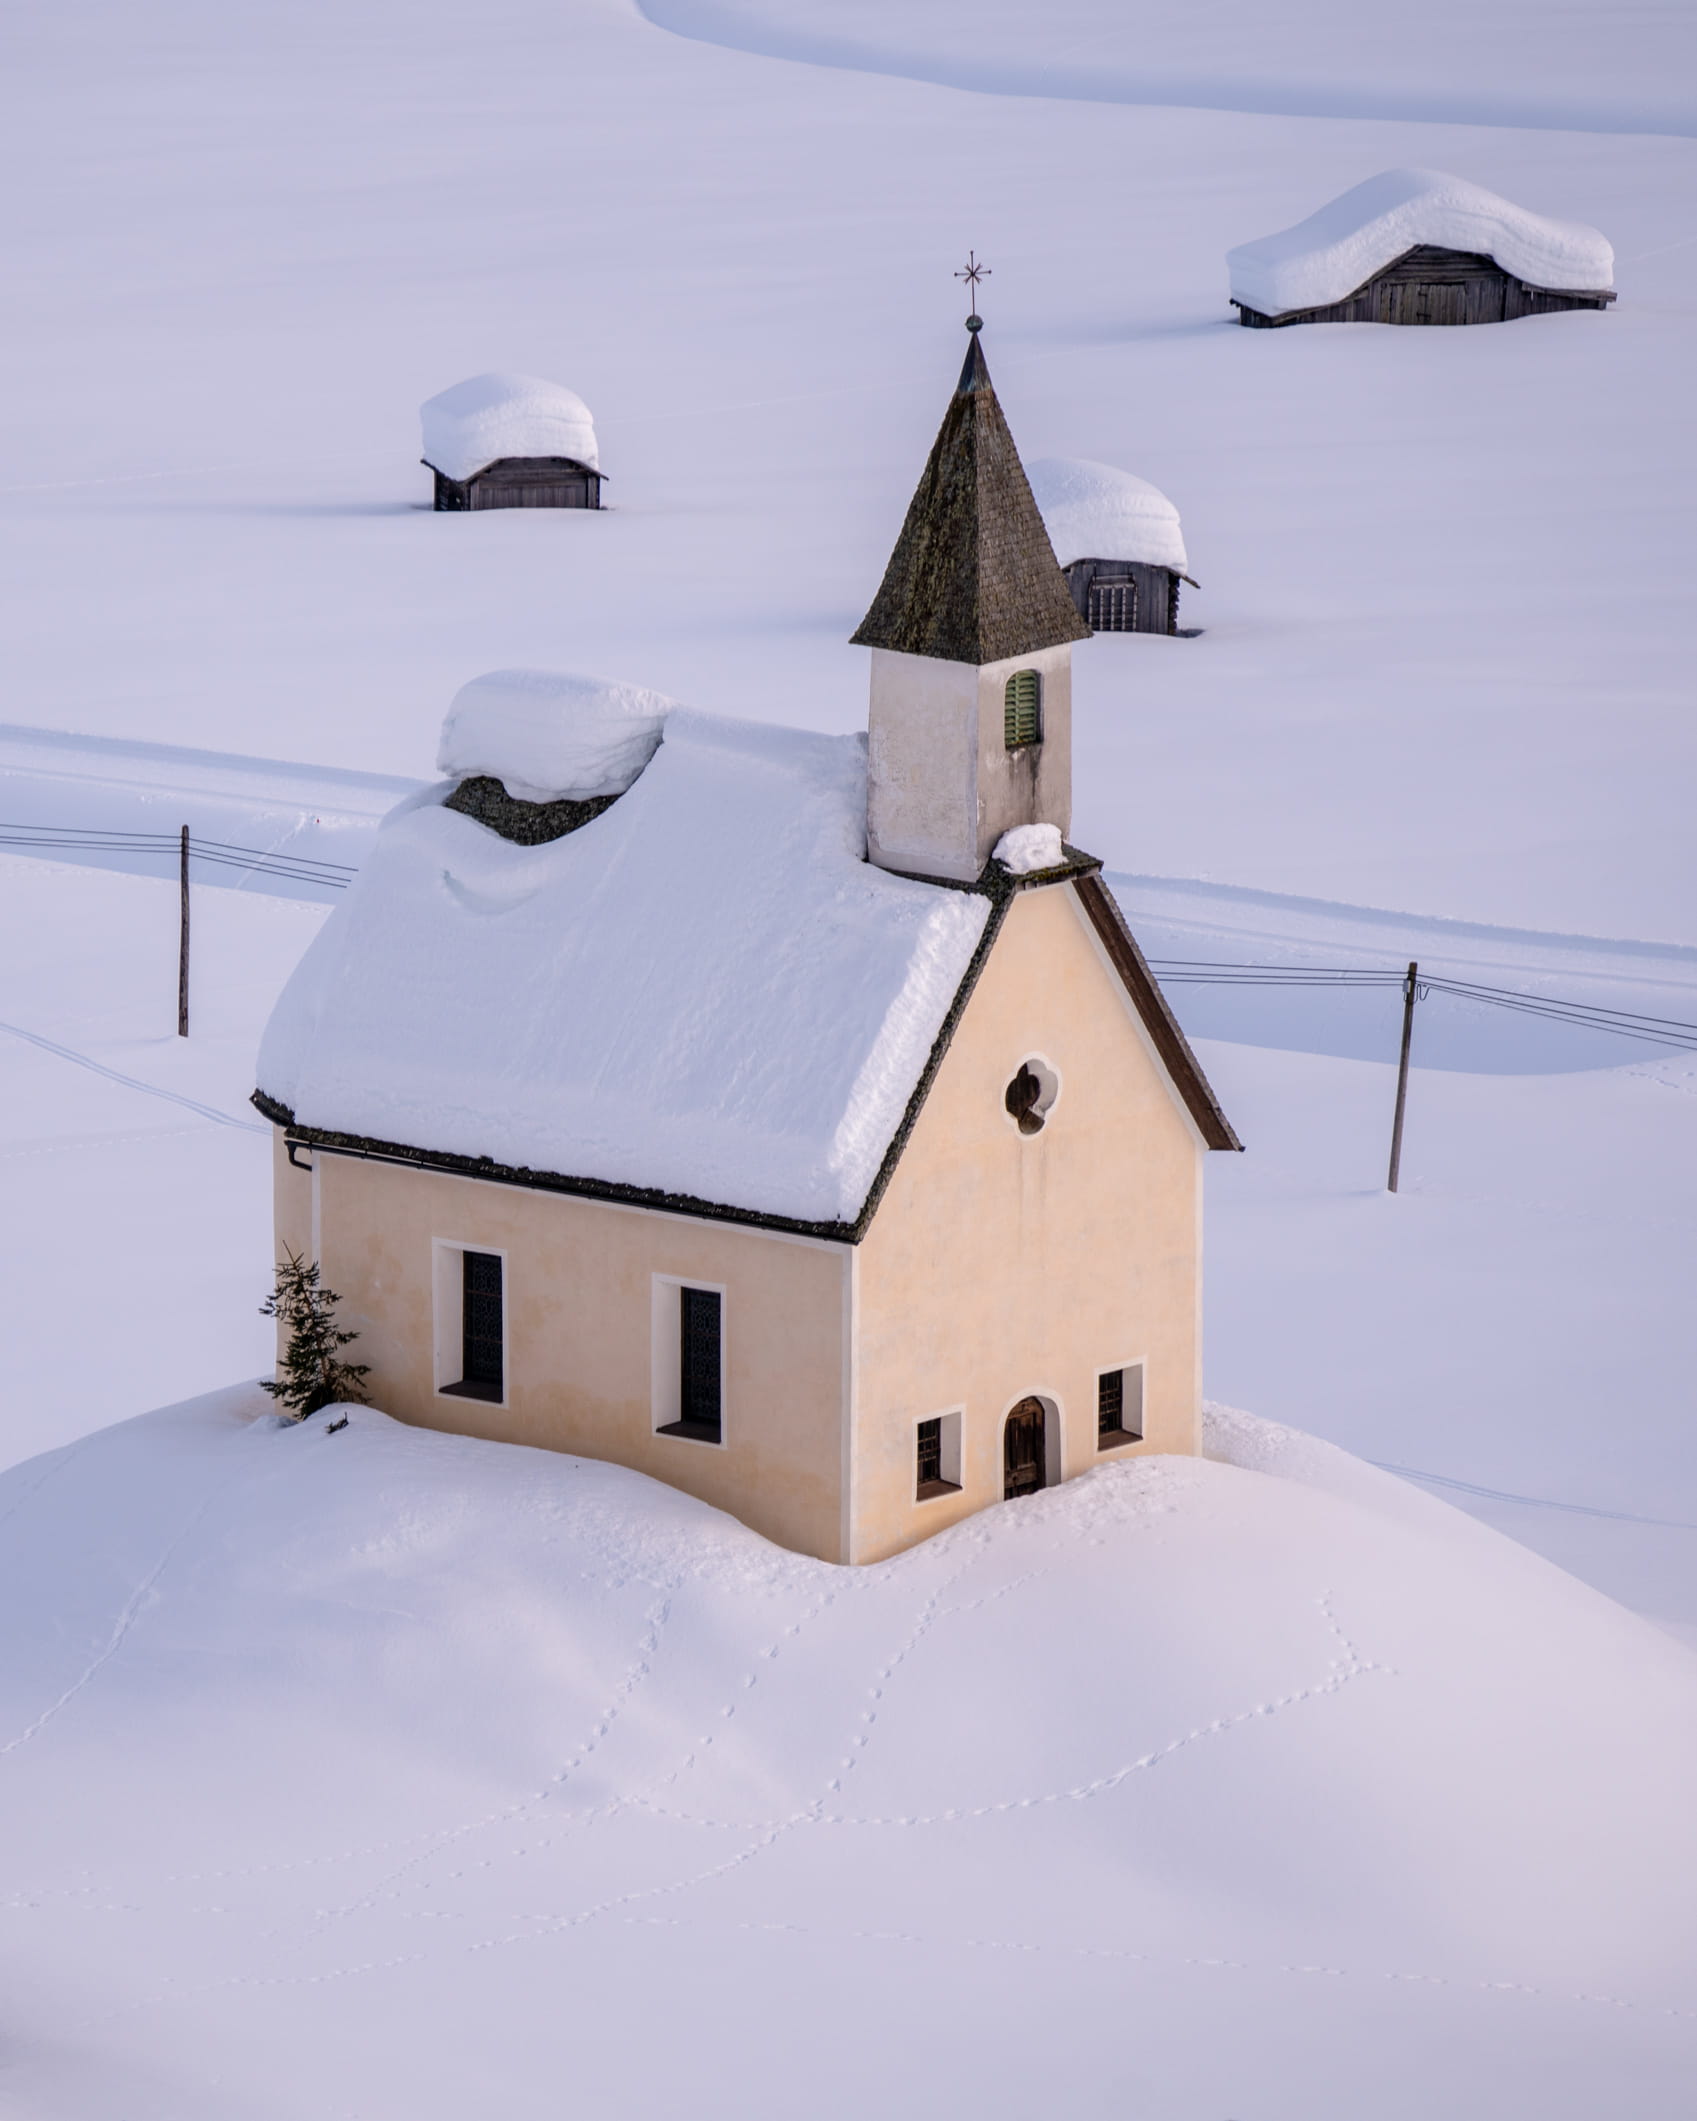 Tiny chapel of Obertilliach surrounded by thick snow, Lesachtal